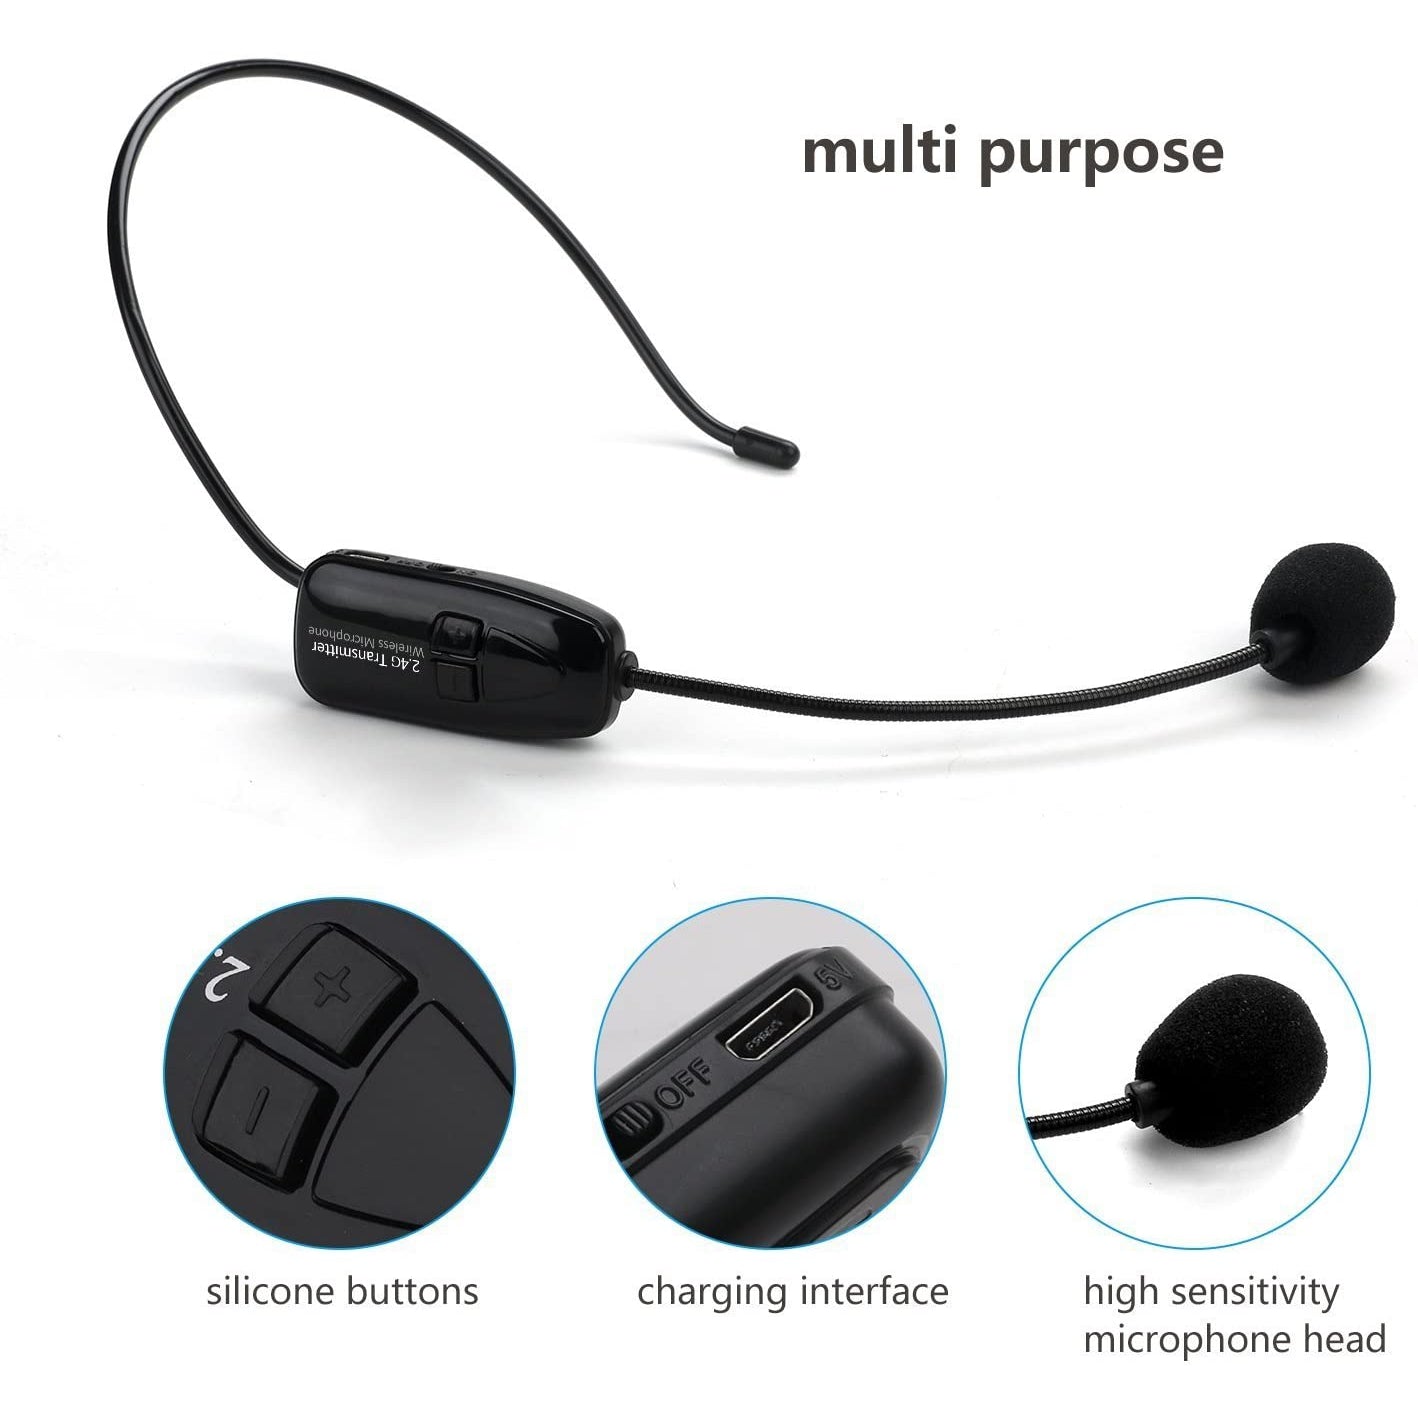 Jelly Comb Wireless Microphone Headset - Black